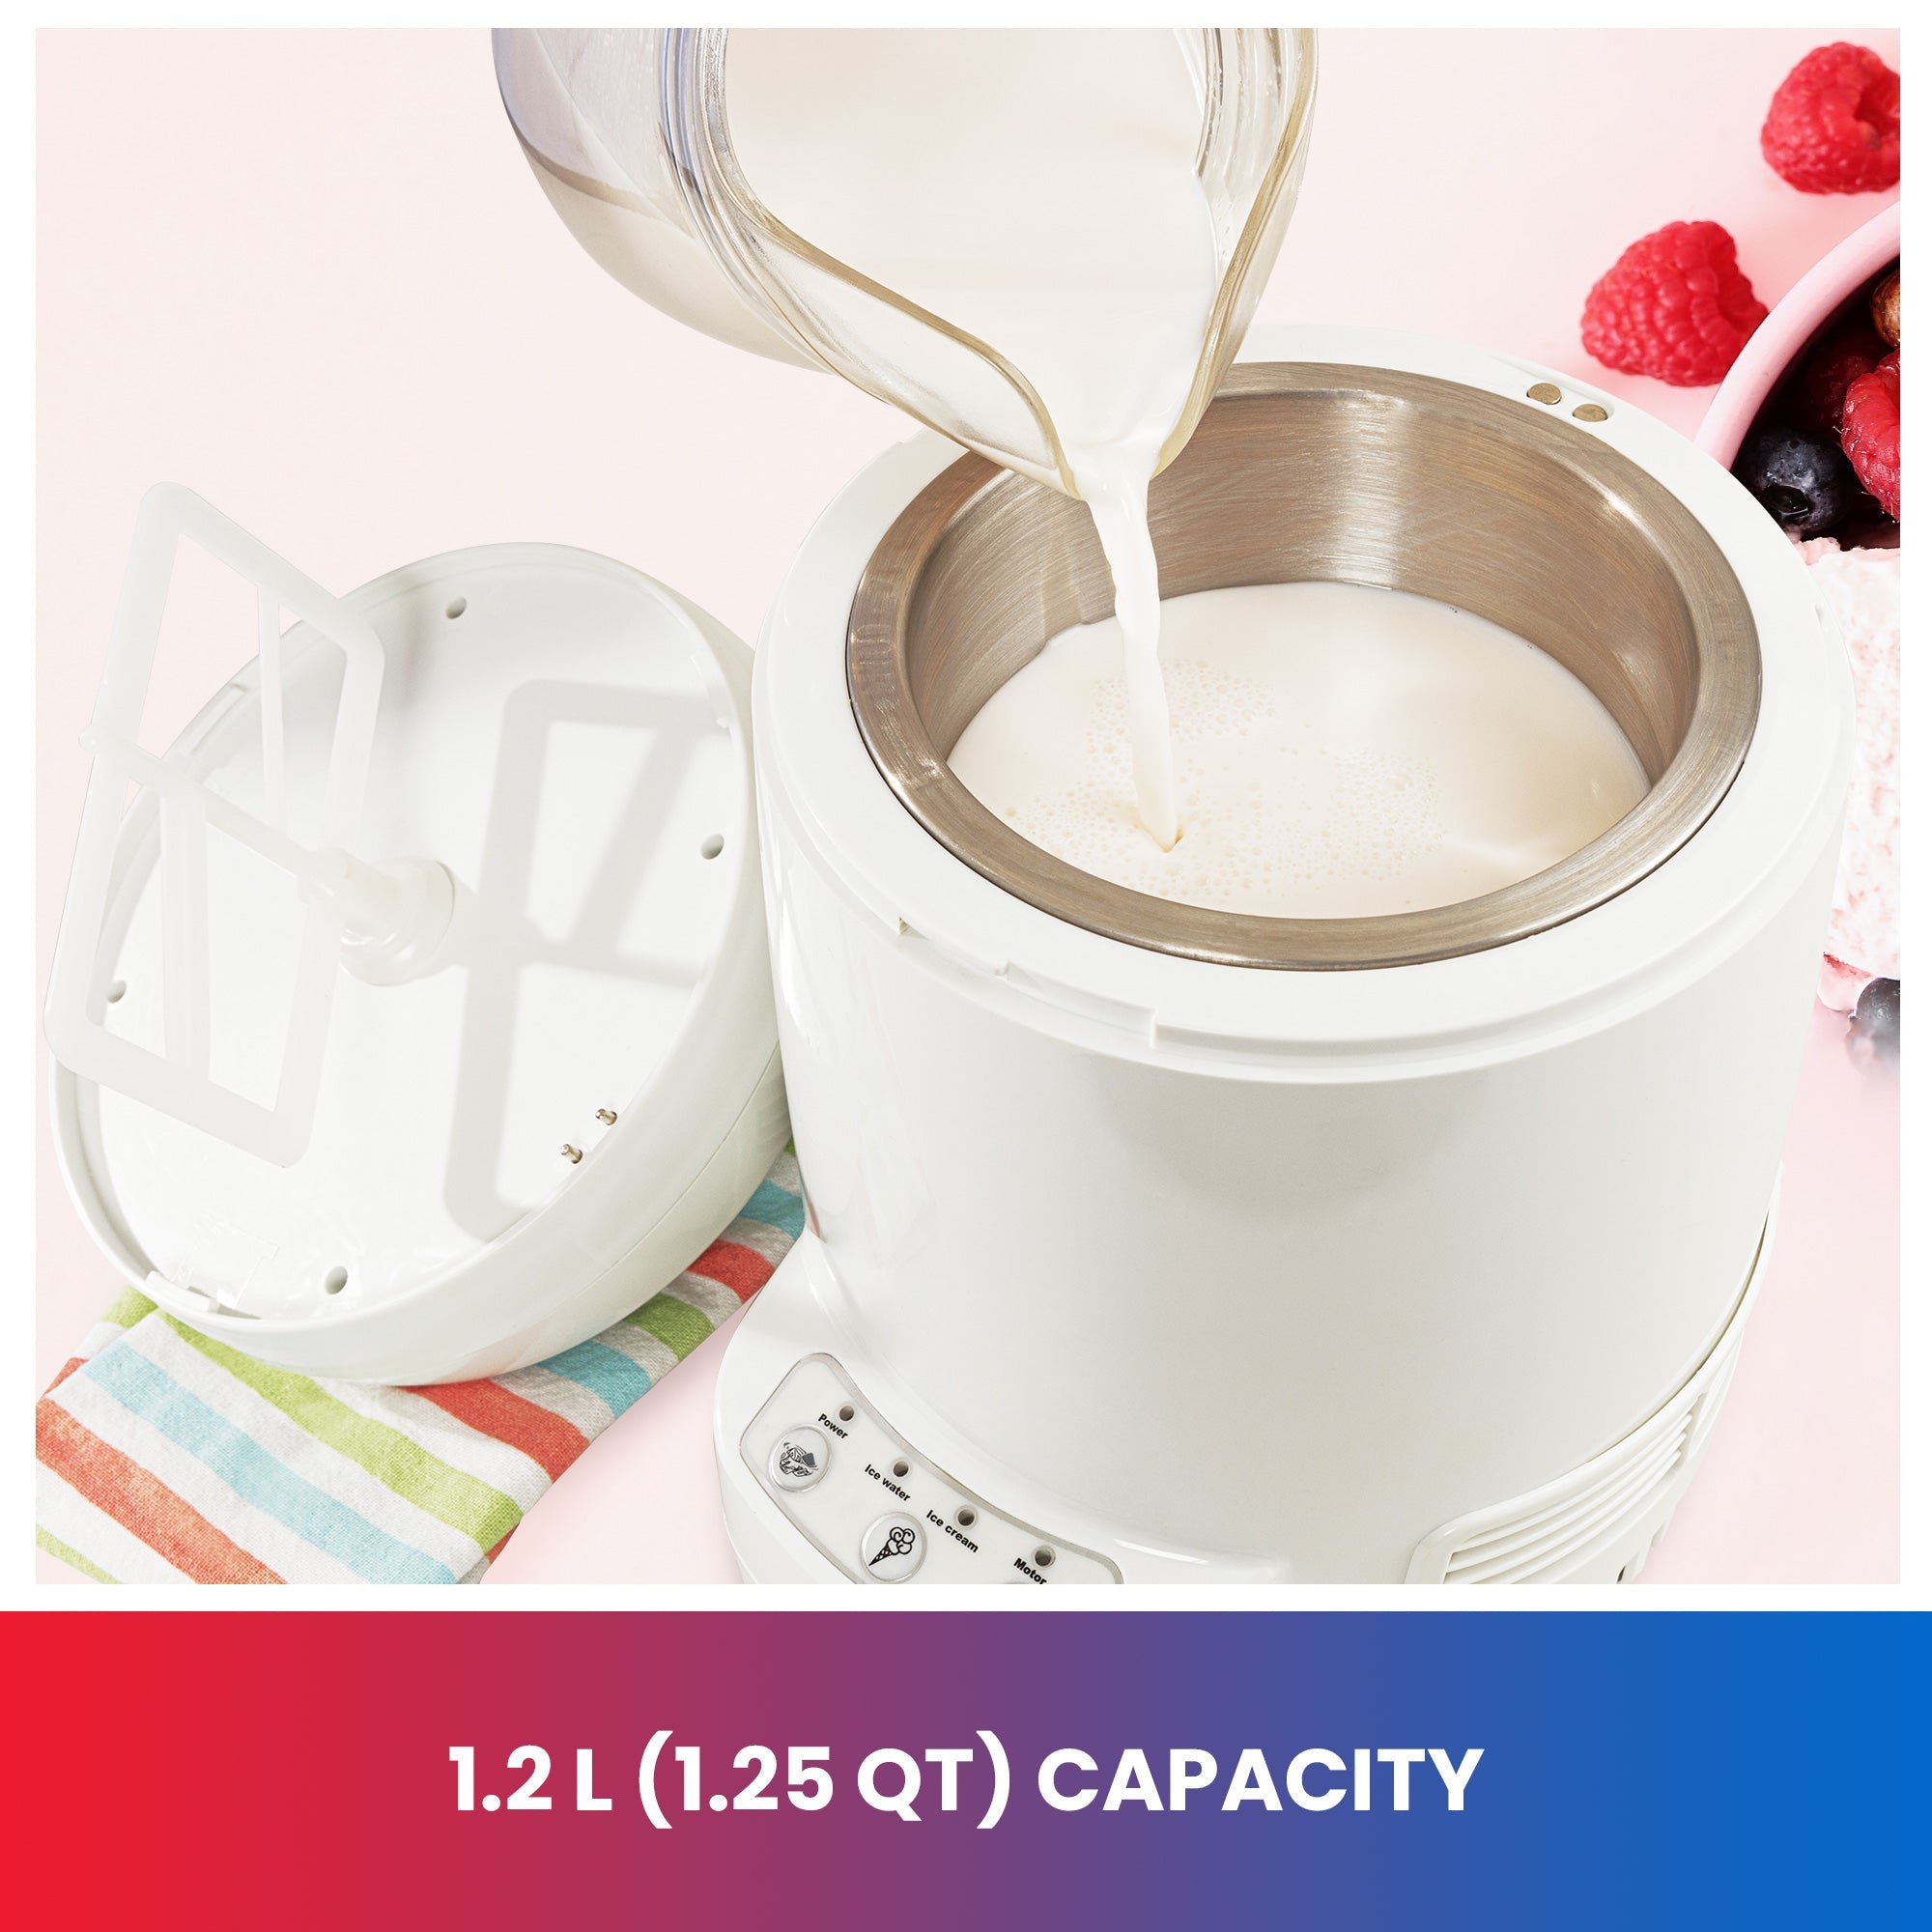 Lifestyle image of ingredients being poured from a measuring cup into the ice cream maker. Text below reads, "1.2L (1.25 qt) capacity"